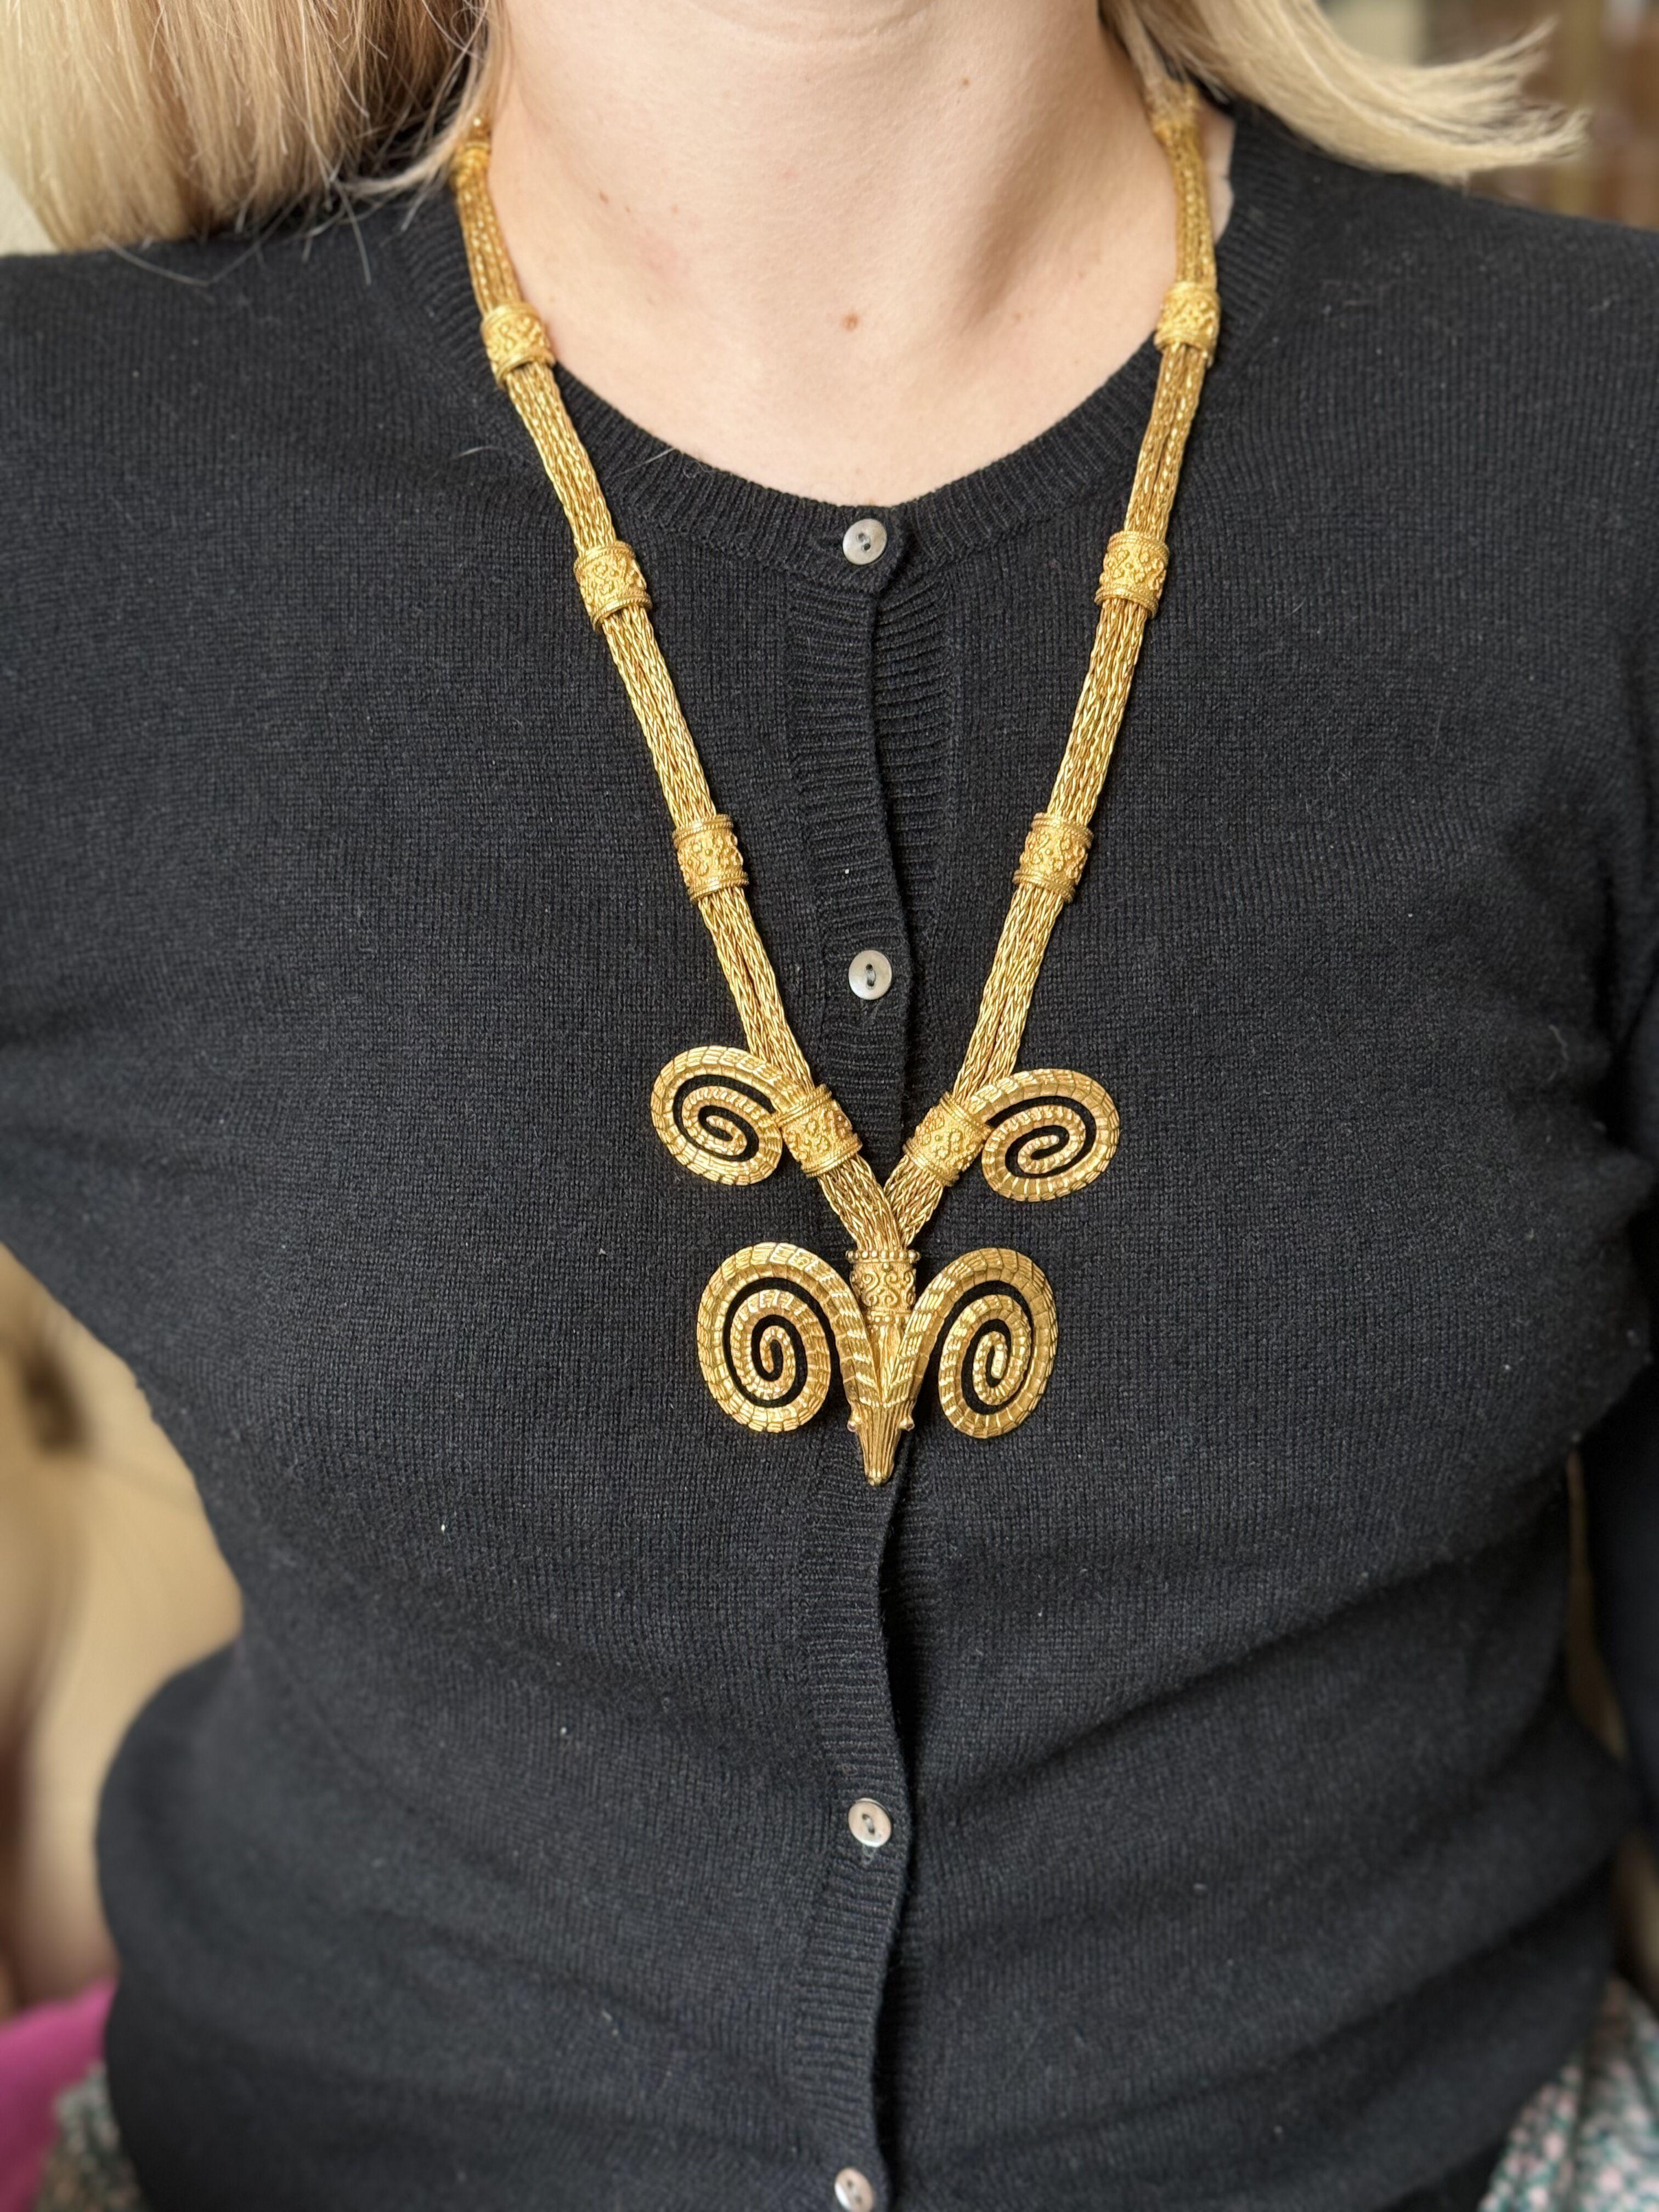 Iconic ram's head necklace by Ilias Lalaunis of Greece, with ruby eyes. The necklace is 18k yellow gold, measuring 27